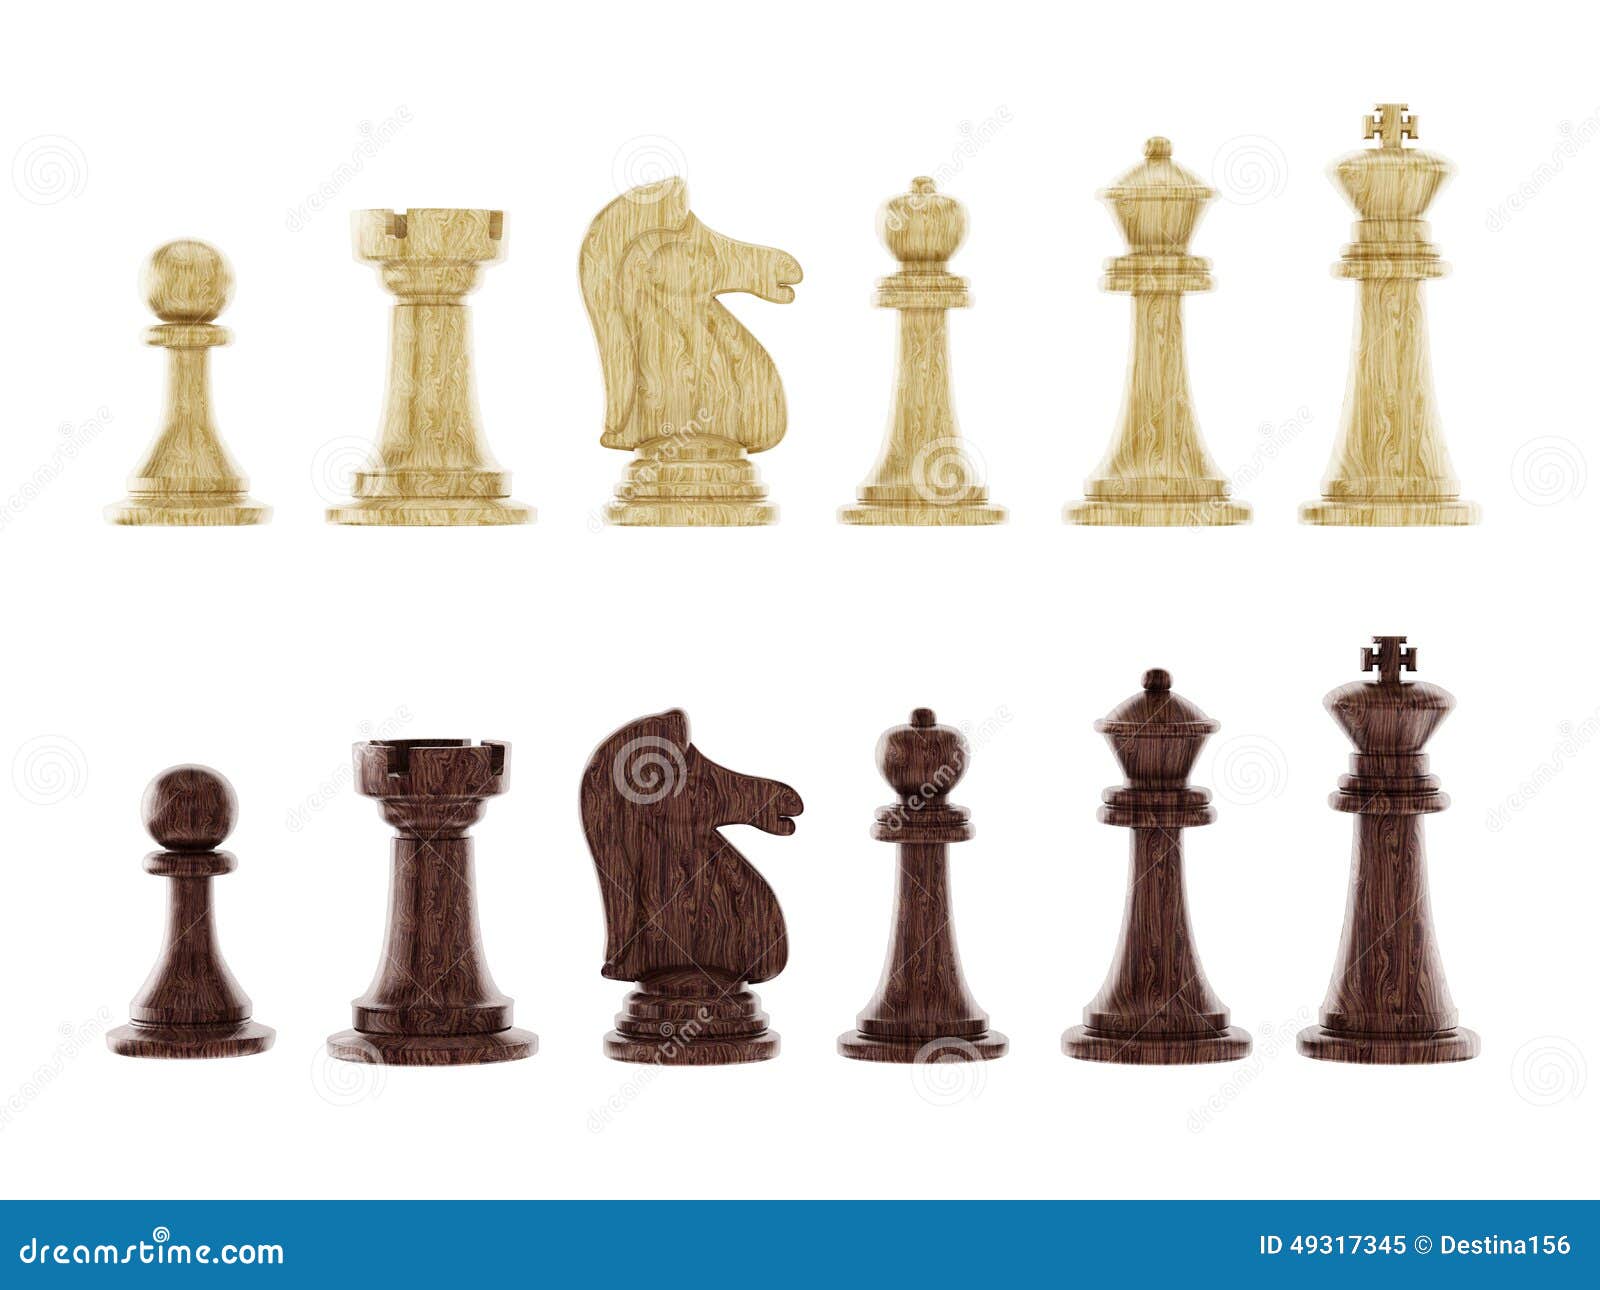 Chess pieces stock illustration. Illustration of objects - 49317345